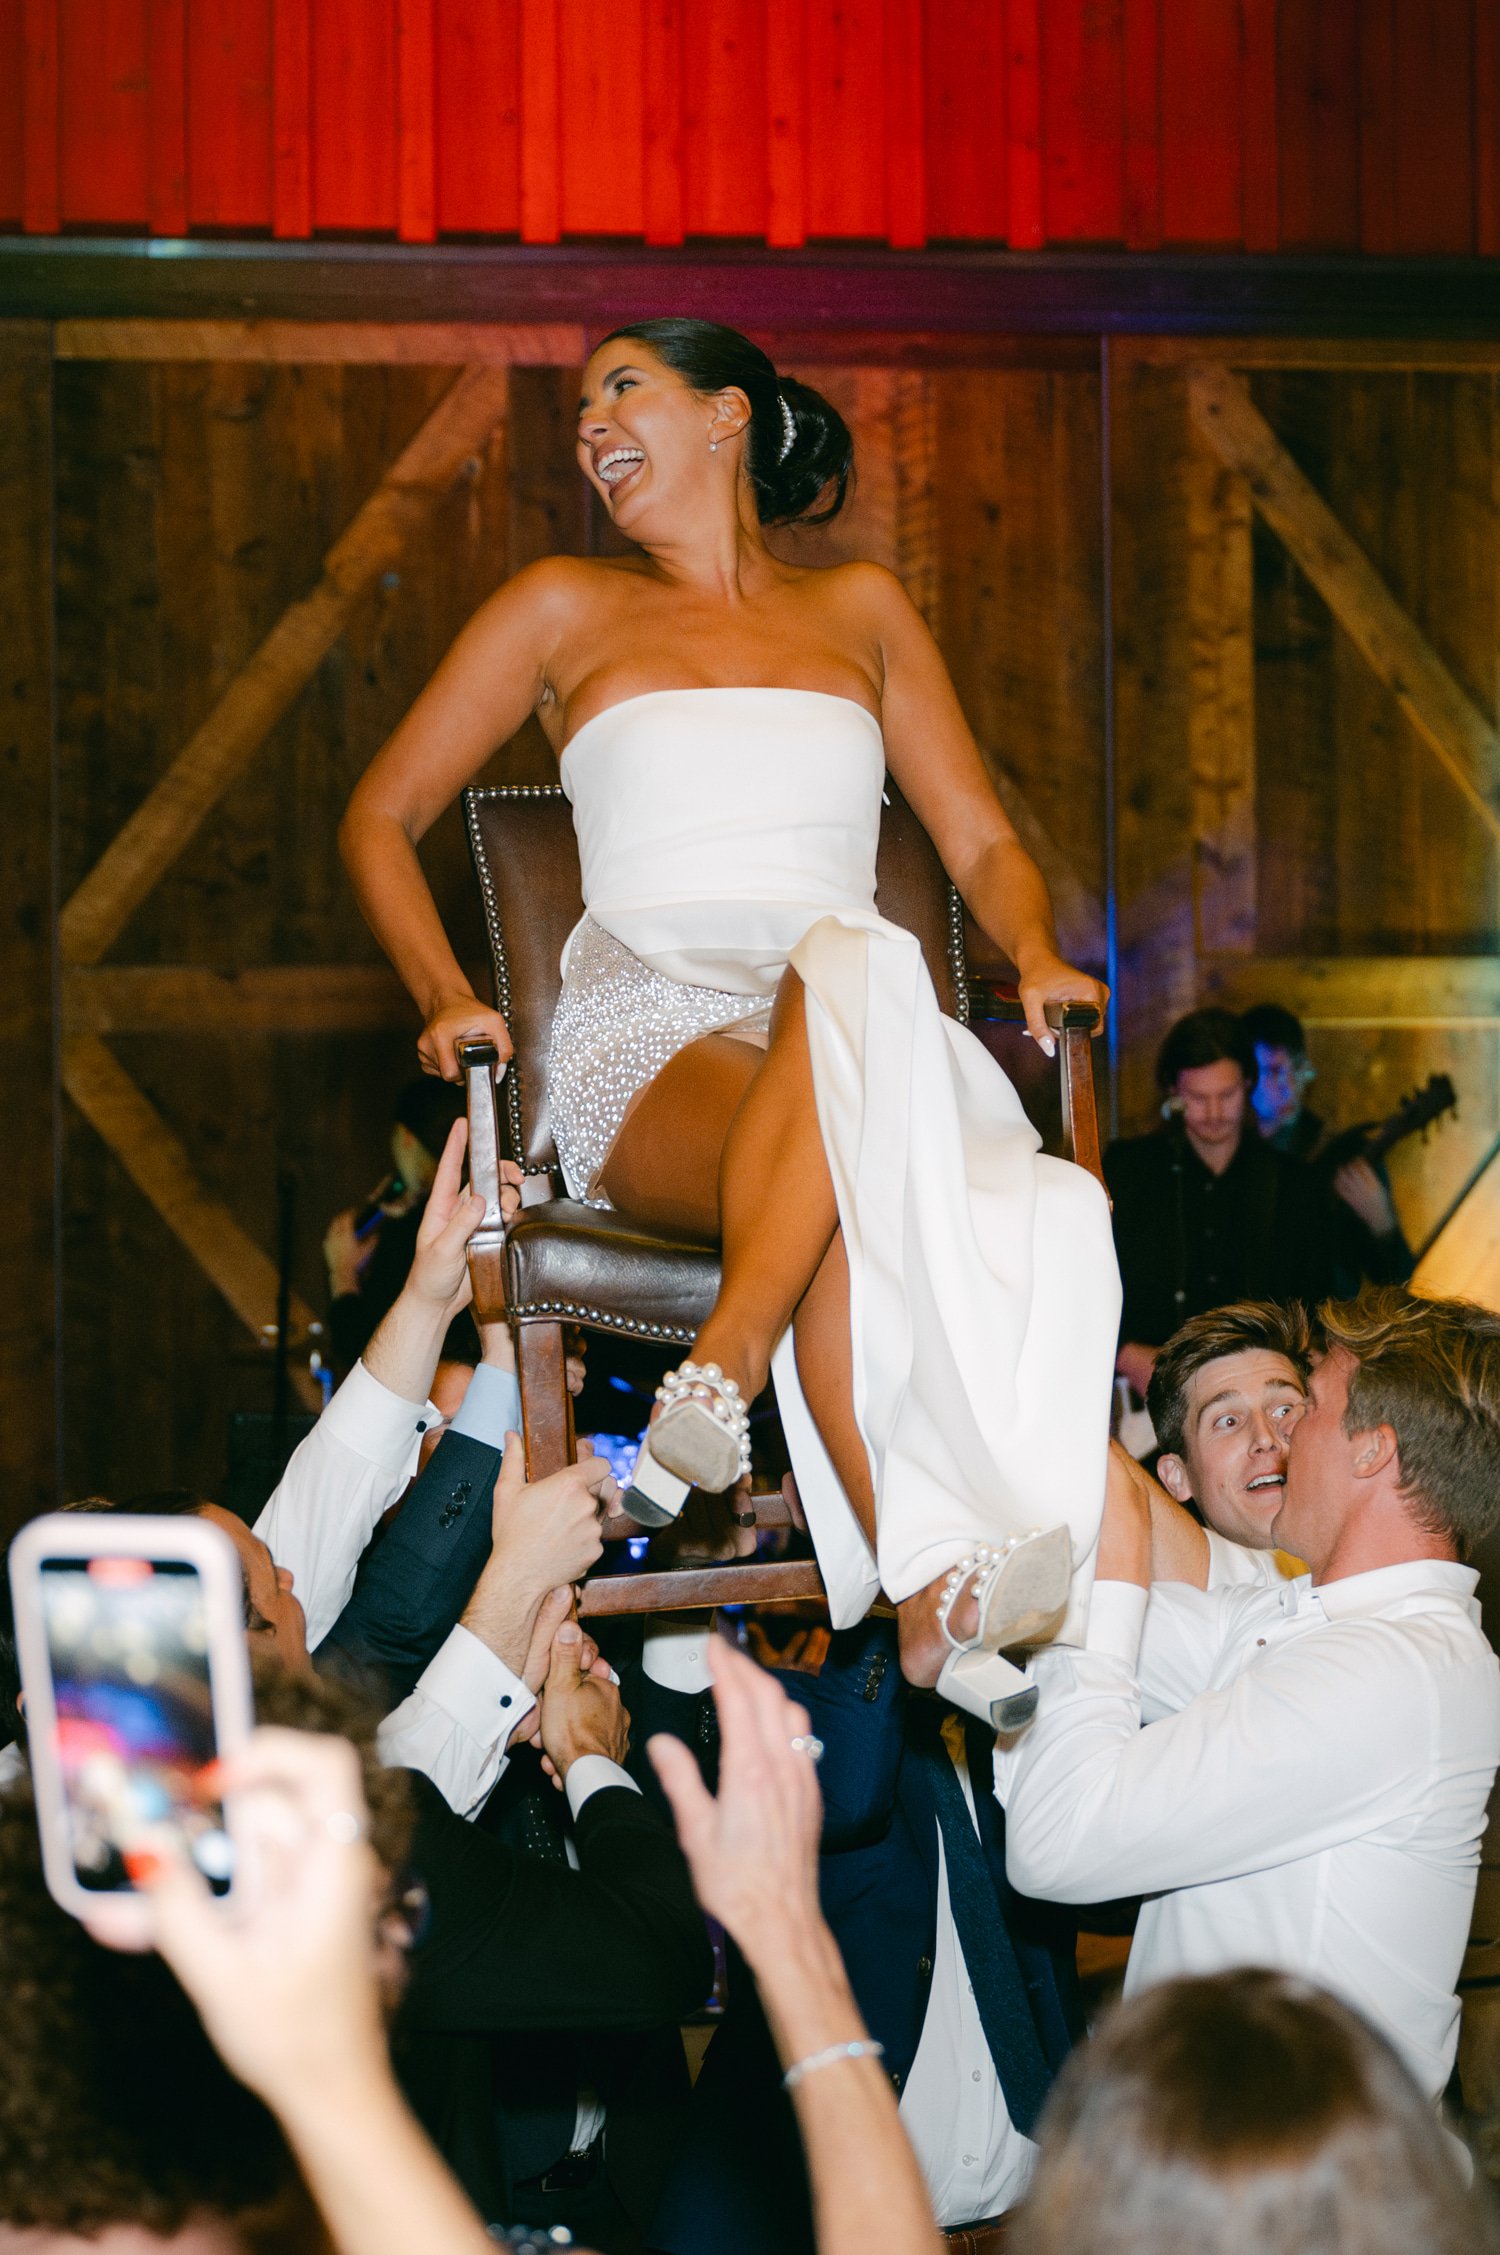 Martis Camp Wedding, photo of the bride carried during the afterparty